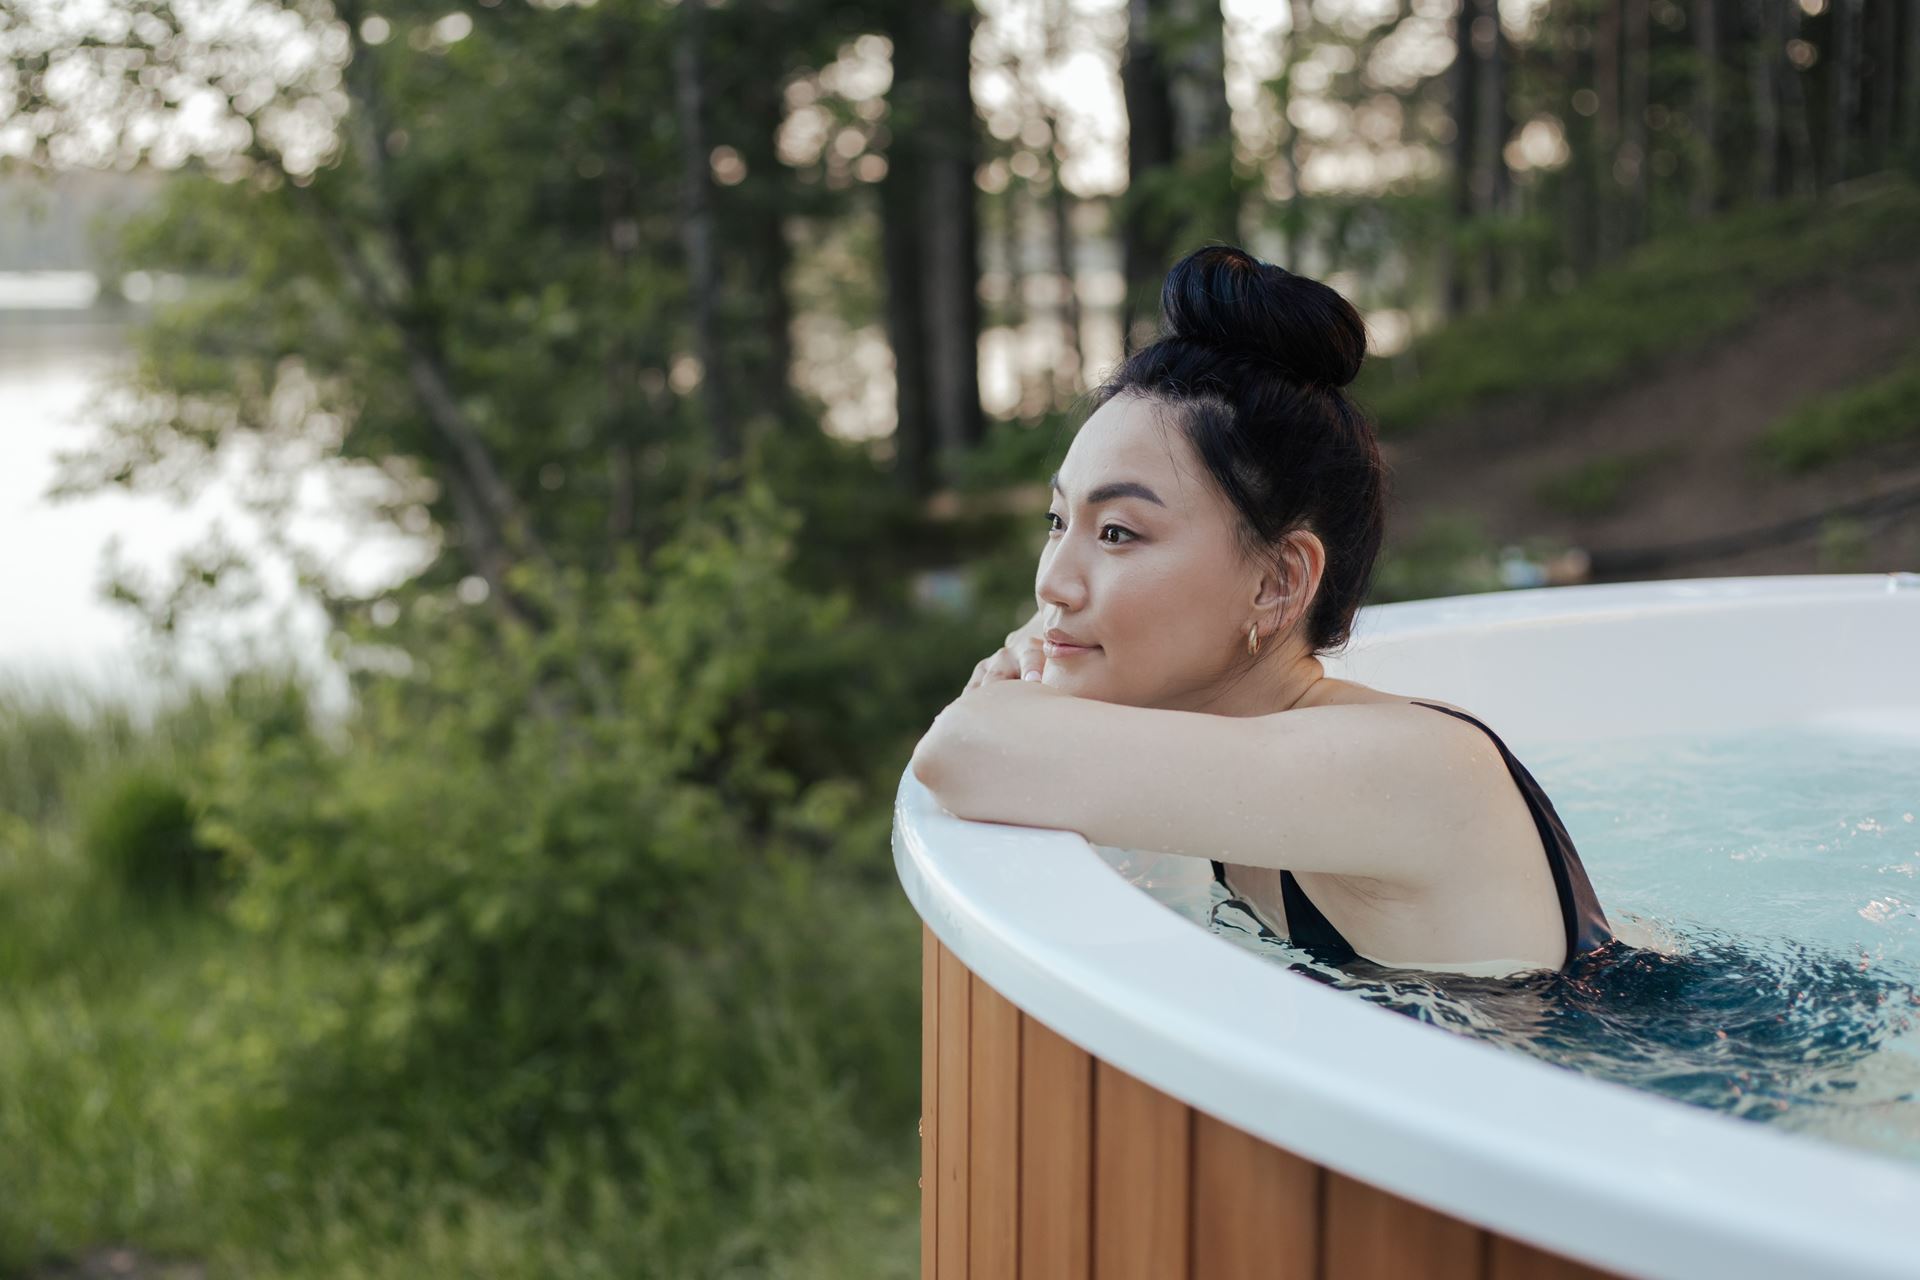 Woman soaks in hot tub looking out over forested area